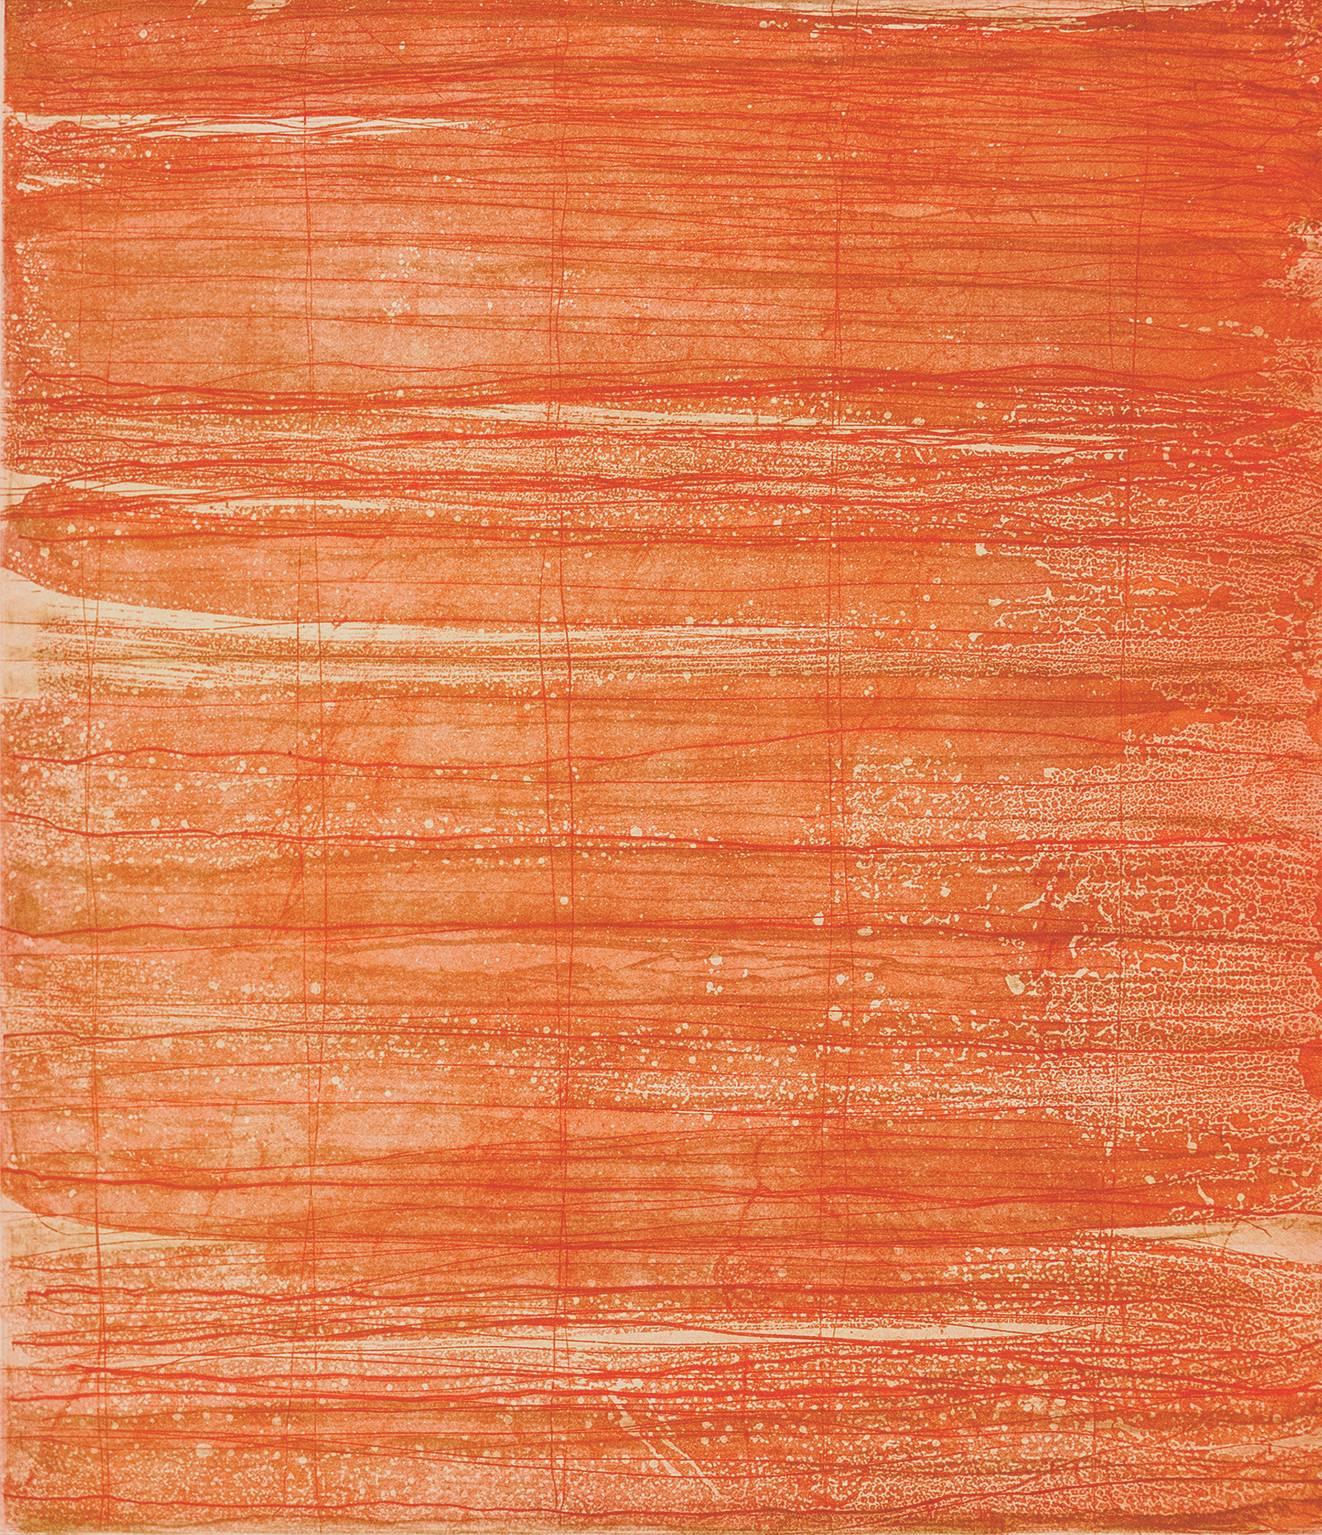 Emily Berger Abstract Print - Bound Brook #26, painterly abstract aquatint monoprint, red, orange, vermillion.